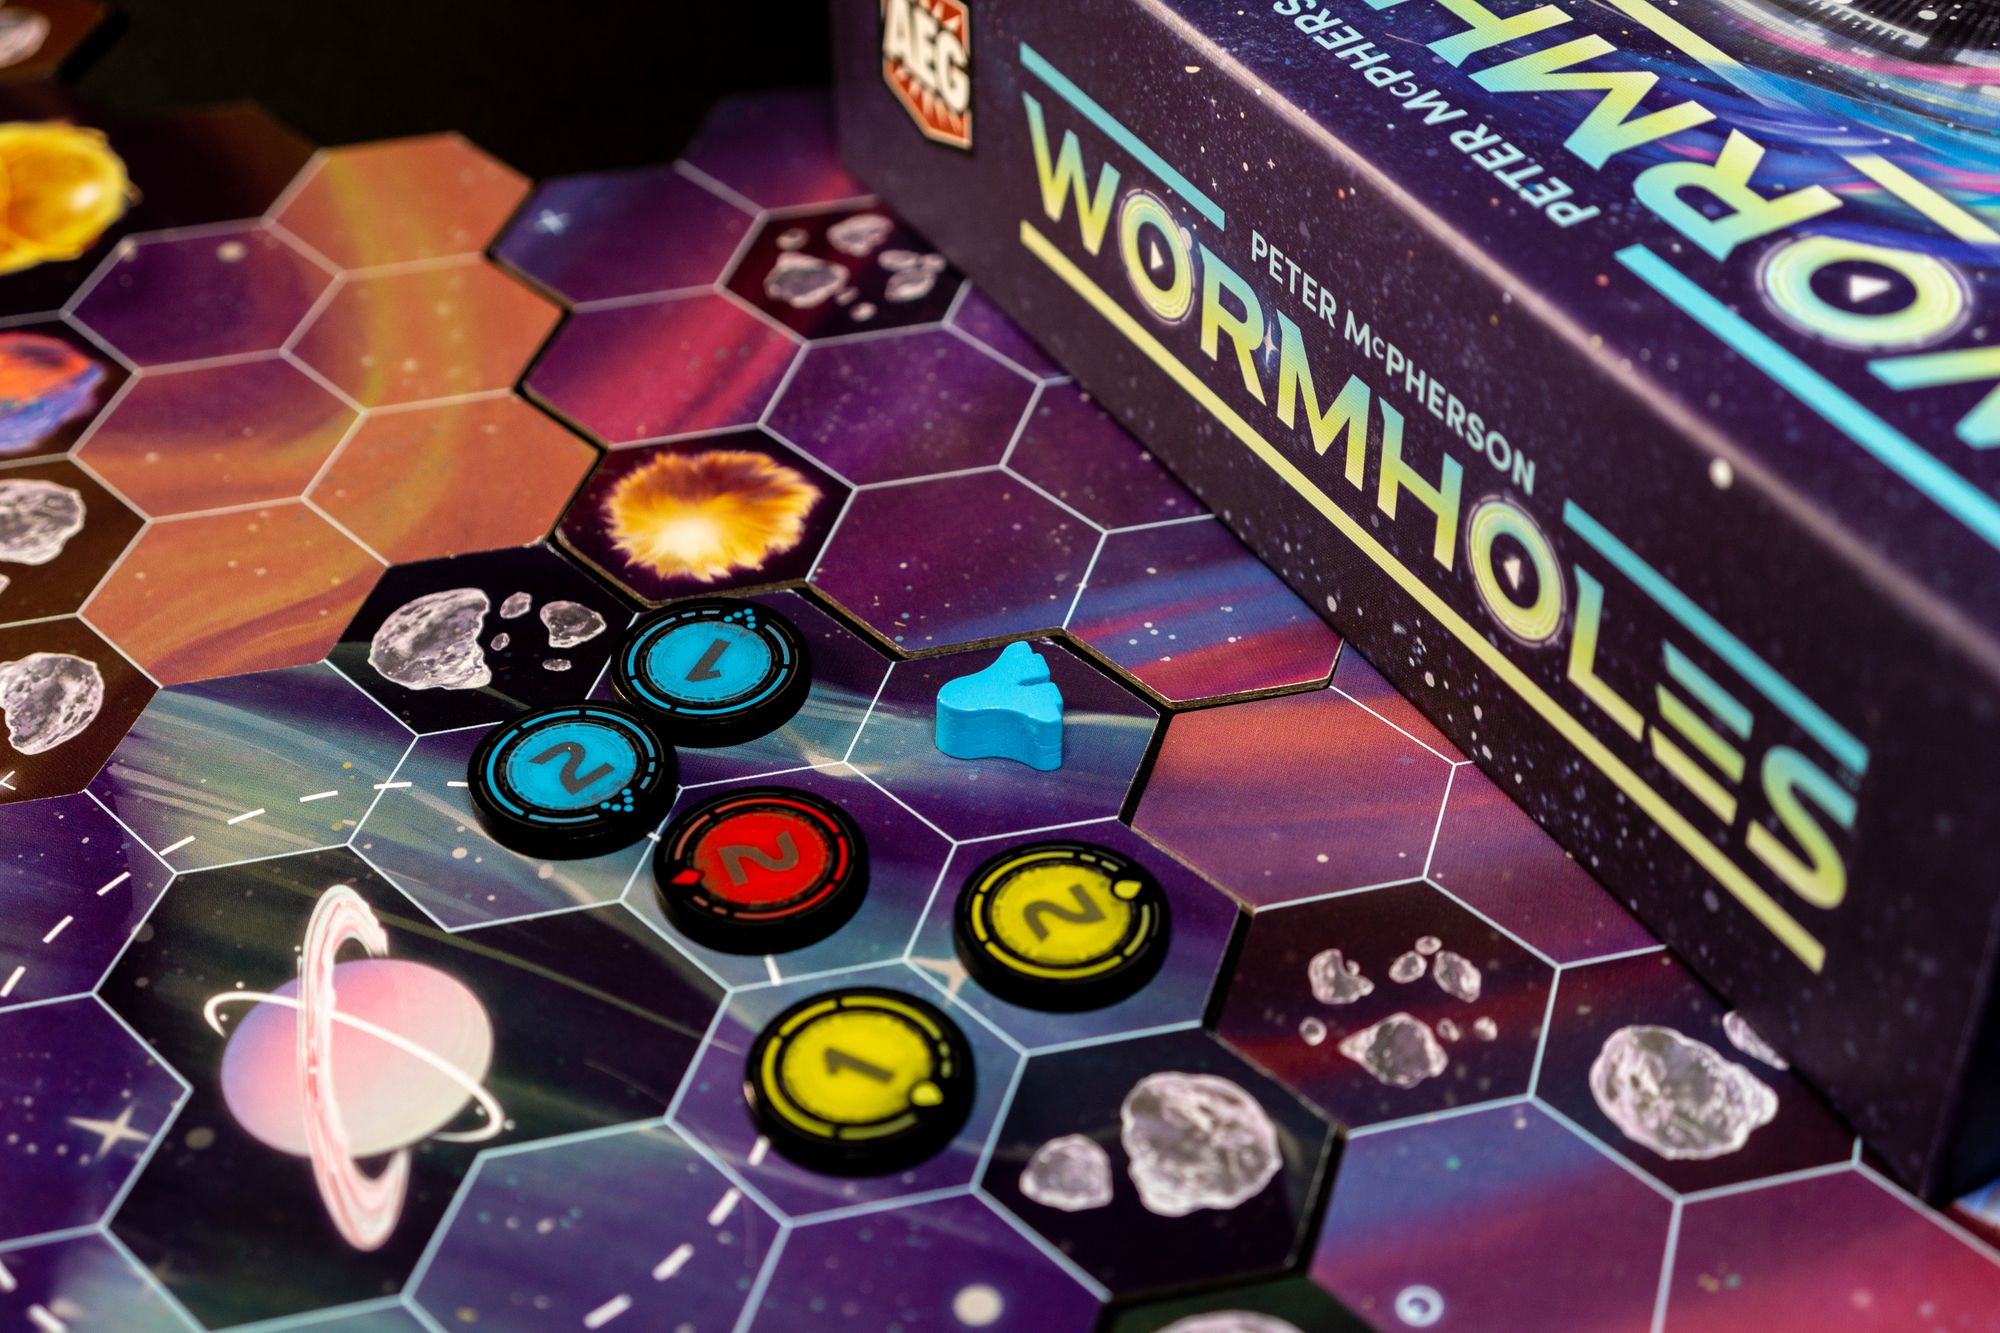 Review: Wormholes